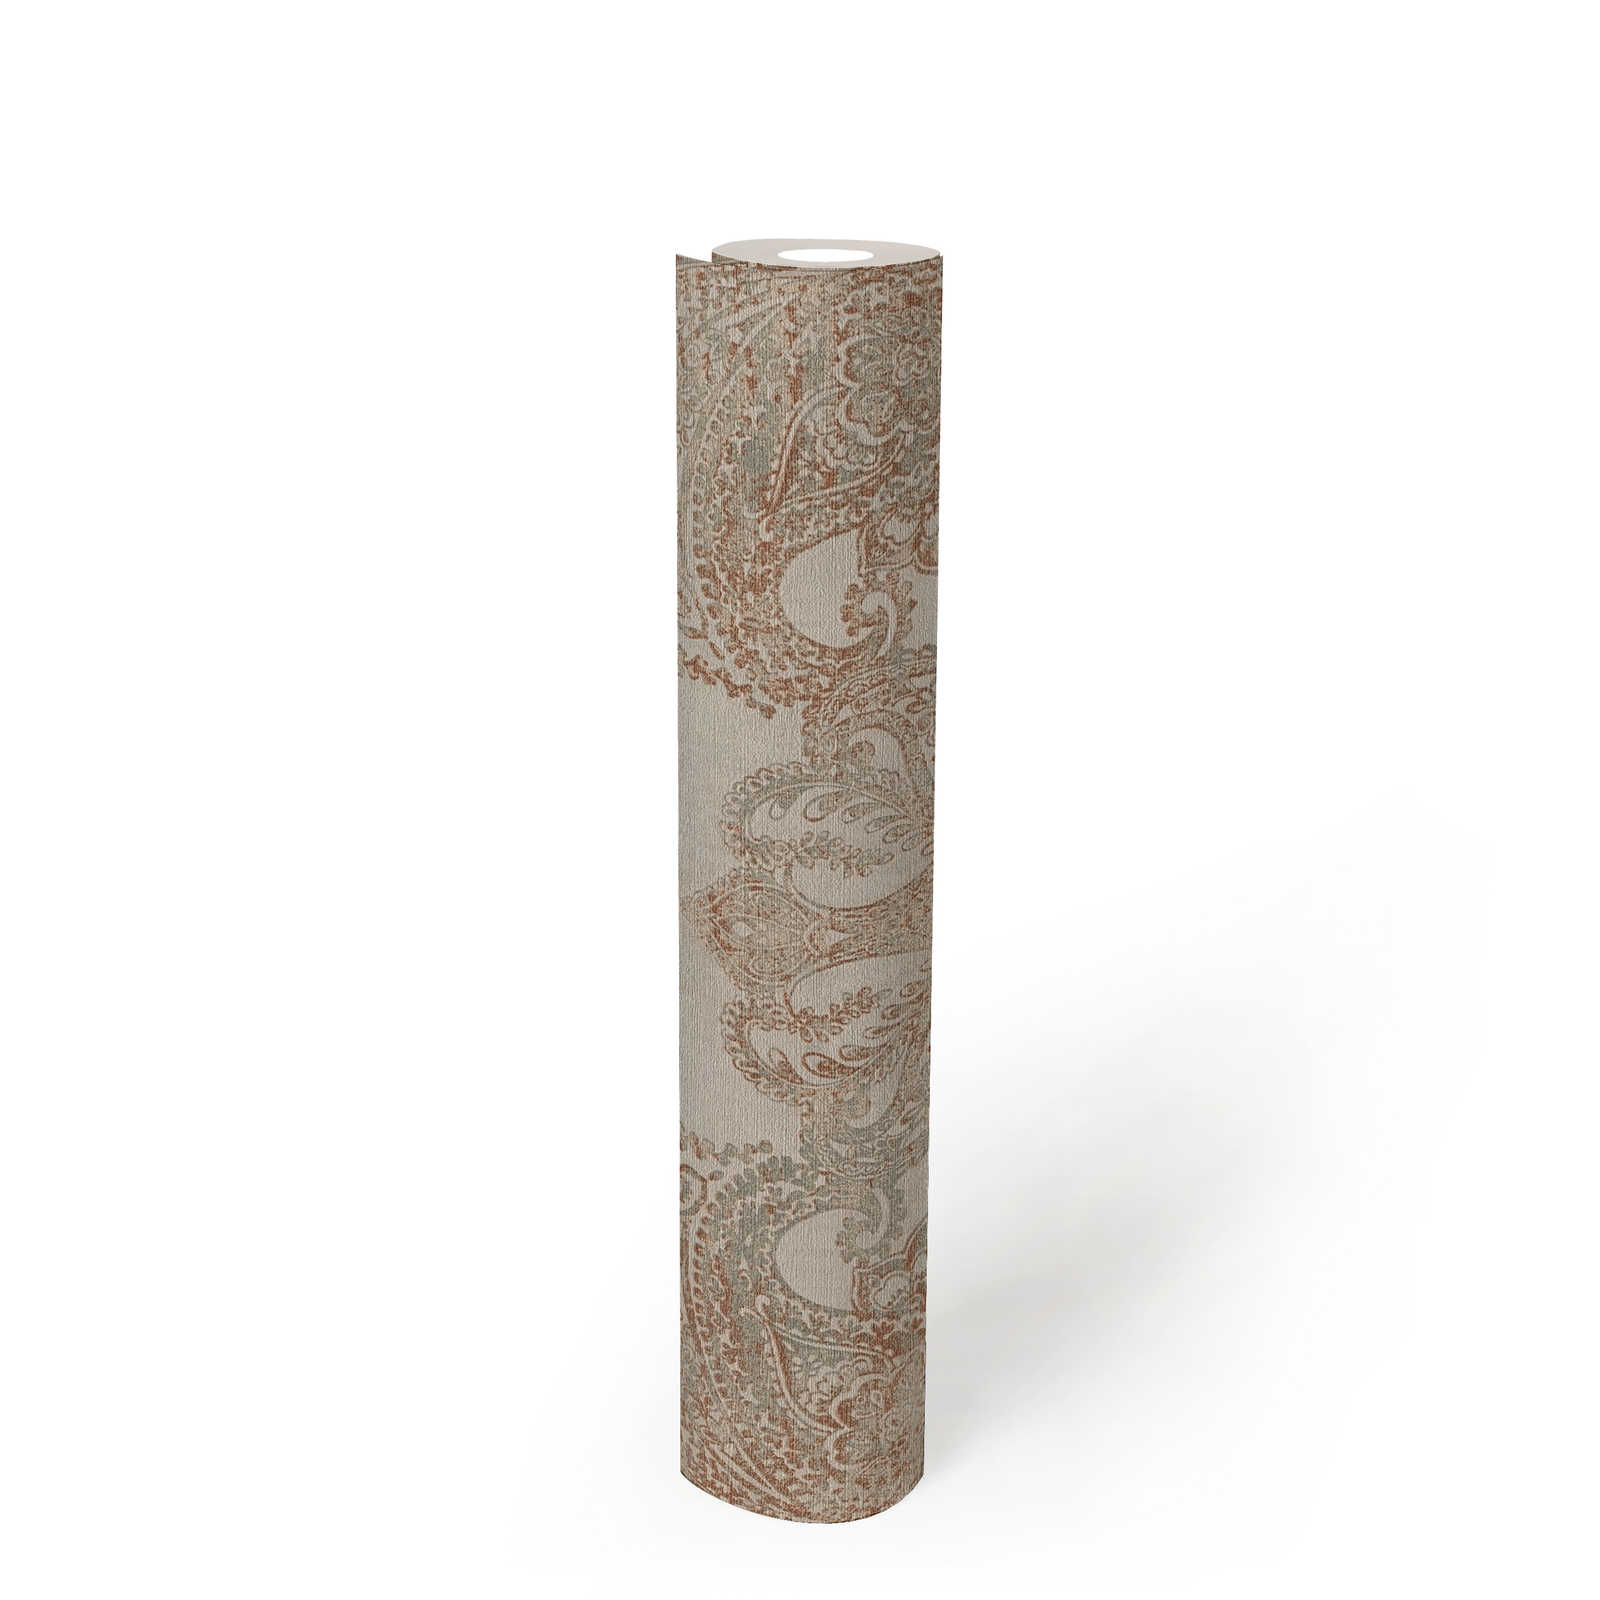             Classic baroque wallpaper with ornaments - beige, grey, reddish brown
        